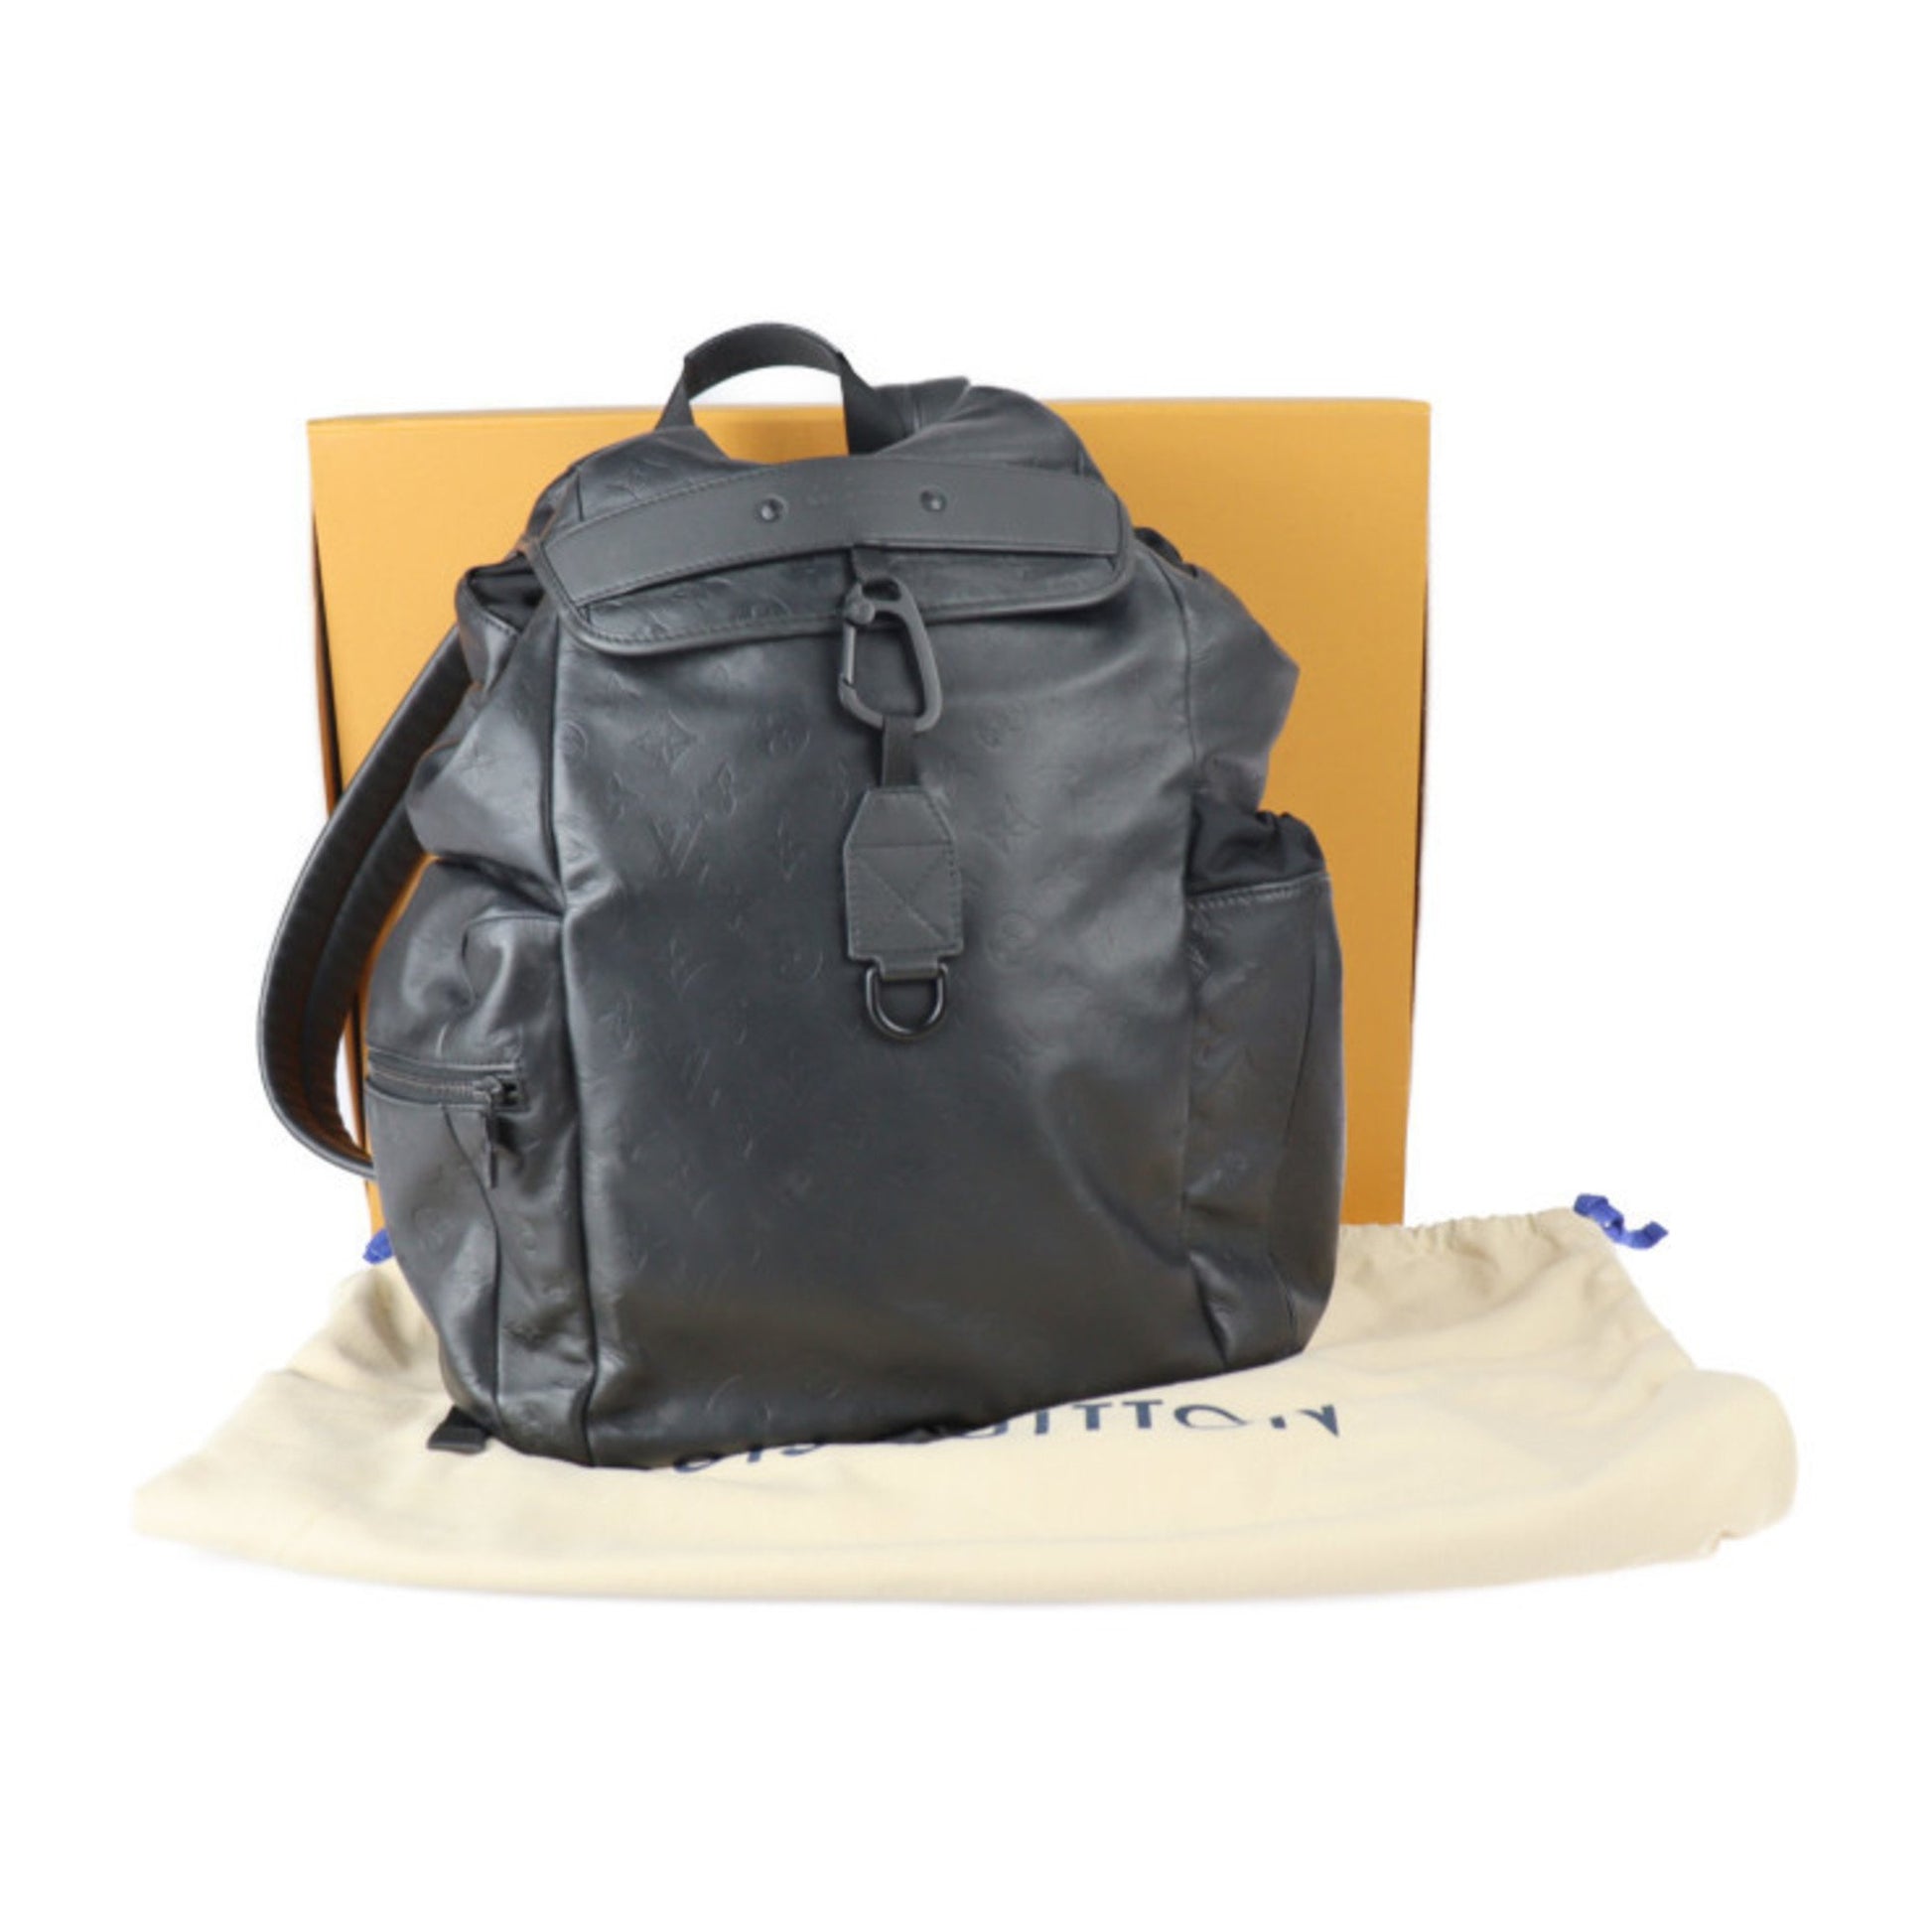 Louis Vuitton Discovery Discovery backpack (M43680)